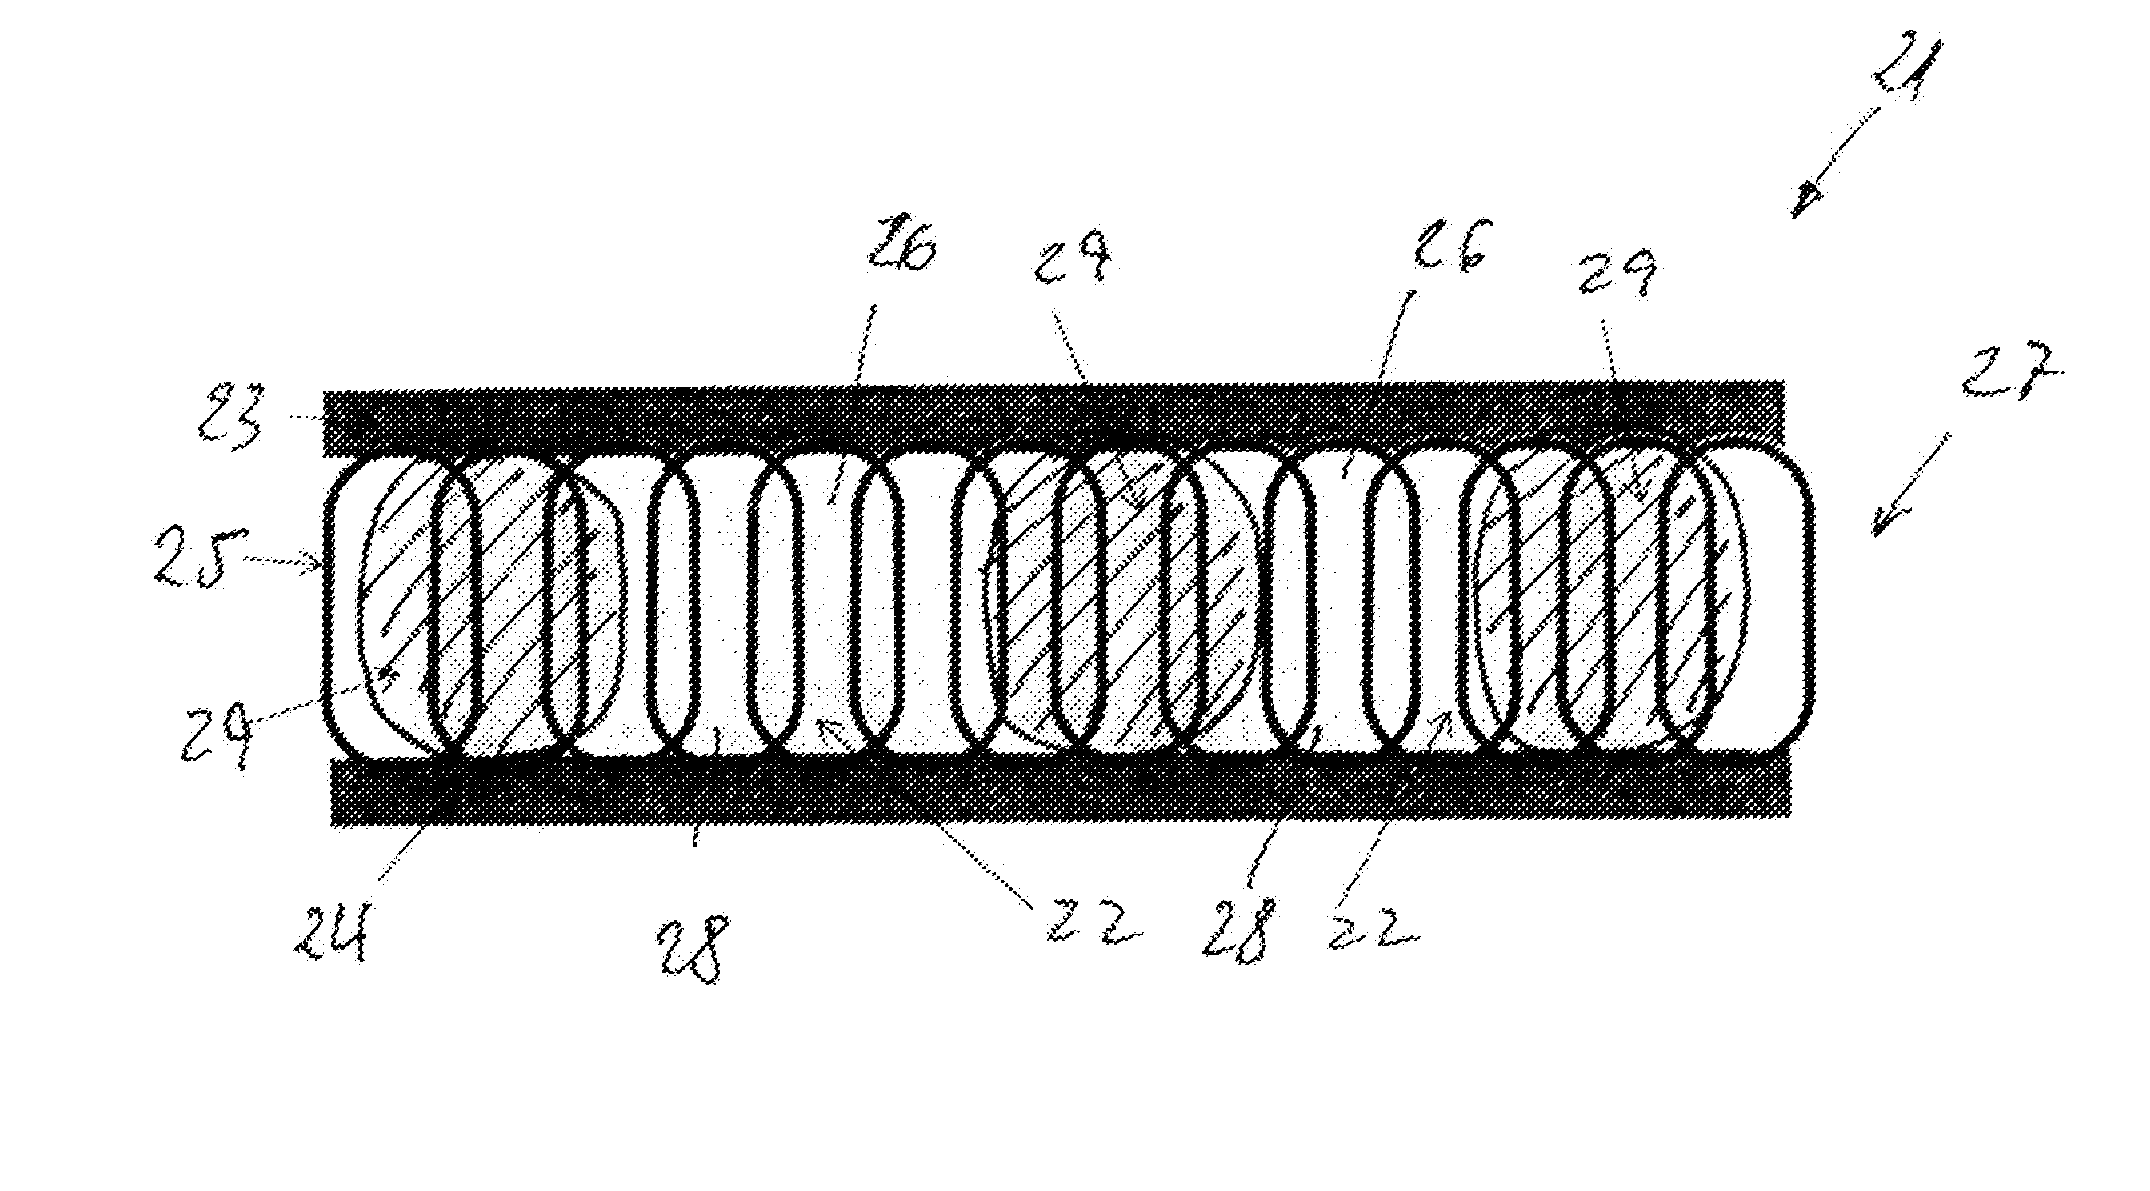 Apparatus for conducting a fluid